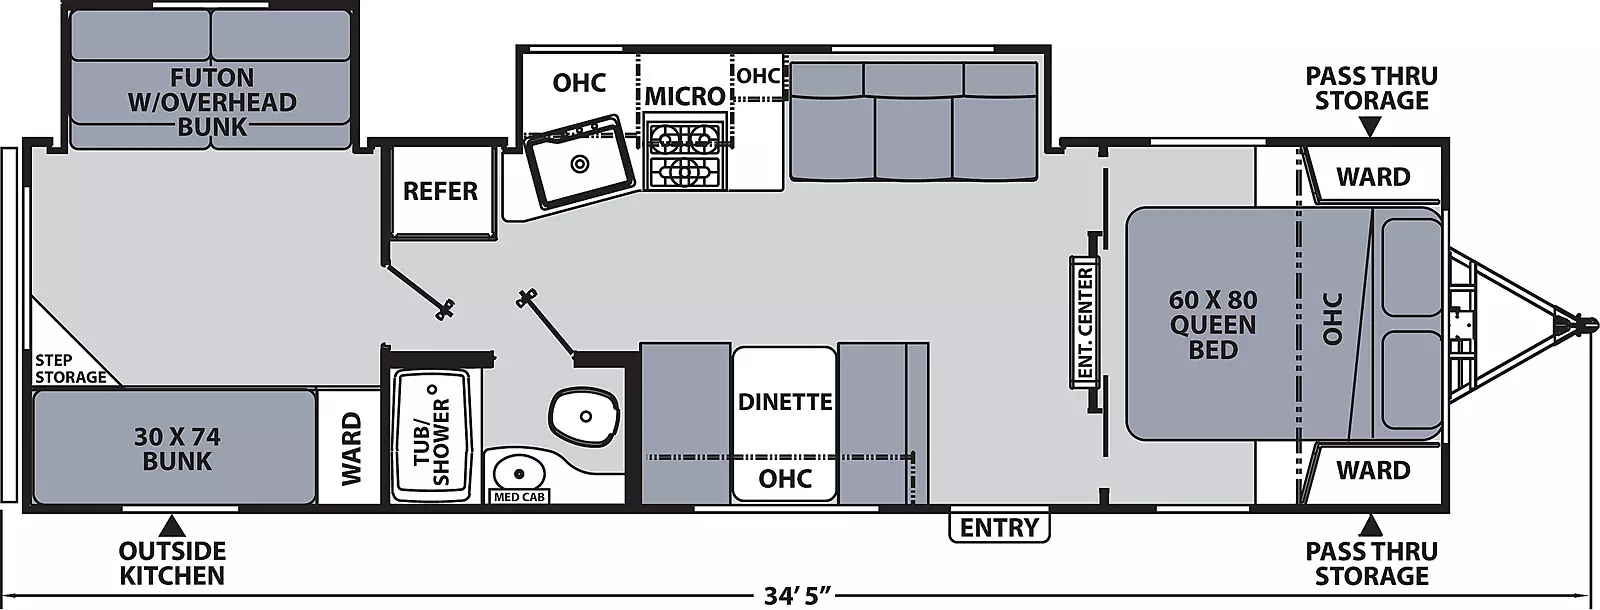 The 300BHS has two slide outs on the off-door side and one entry door on the door side. Interior layout from front to back: front bedroom with foot facing queen bed, overhead cabinet, and wardrobes on either side of the bed; entertainment center between bedroom and kitchen living dining area; off-door side slide out containing sofa and kitchen containing cook top stove, microwave overhead, sink, overhead cabinet; off-door side refrigerator; door side dinette with overhead cabinet; door side side aisle bathroom containing tub/shower, medicine cabinet, sink and toilet; rear bunk room with off-door side slide out containing futon with overhead bunk and door side bunk, wardrobe and step storage; rear exterior kitchen 